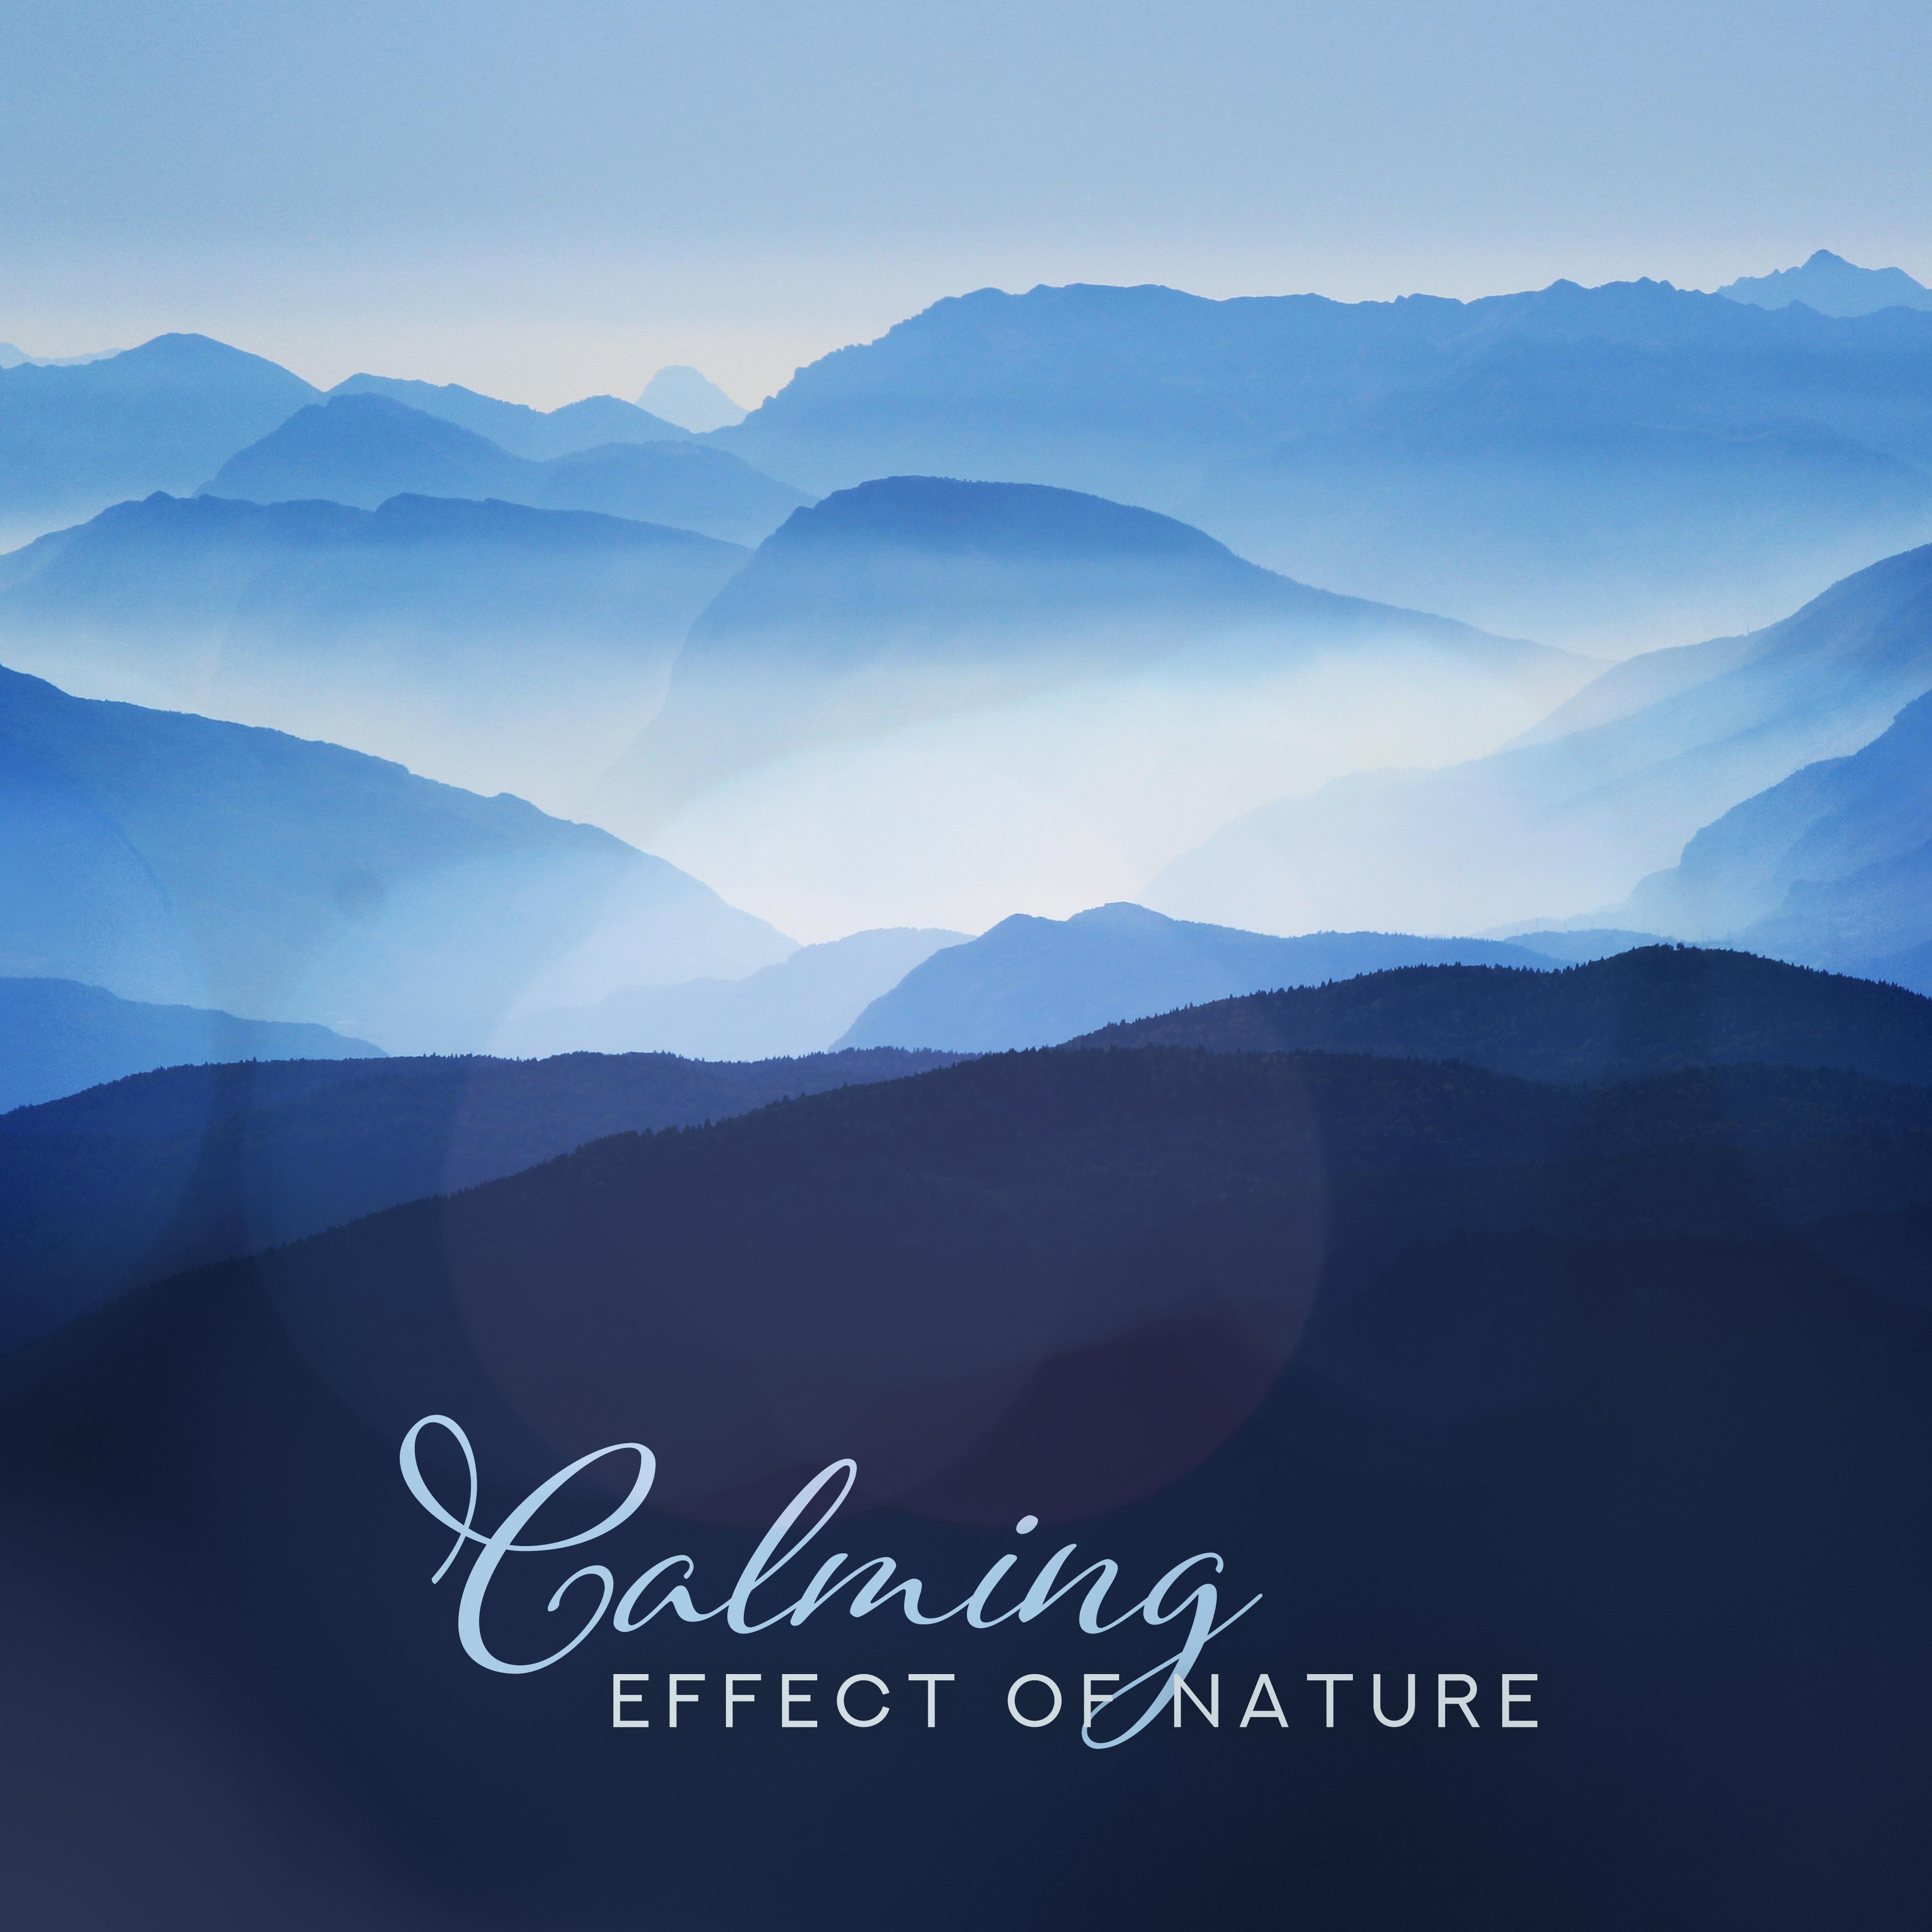 Calming Effect of Nature: Relief in Stress, Soothing Nerves and Stress, Helpful in Falling Asleep and Insomnia, Delicate Music for Rest and Relaxation